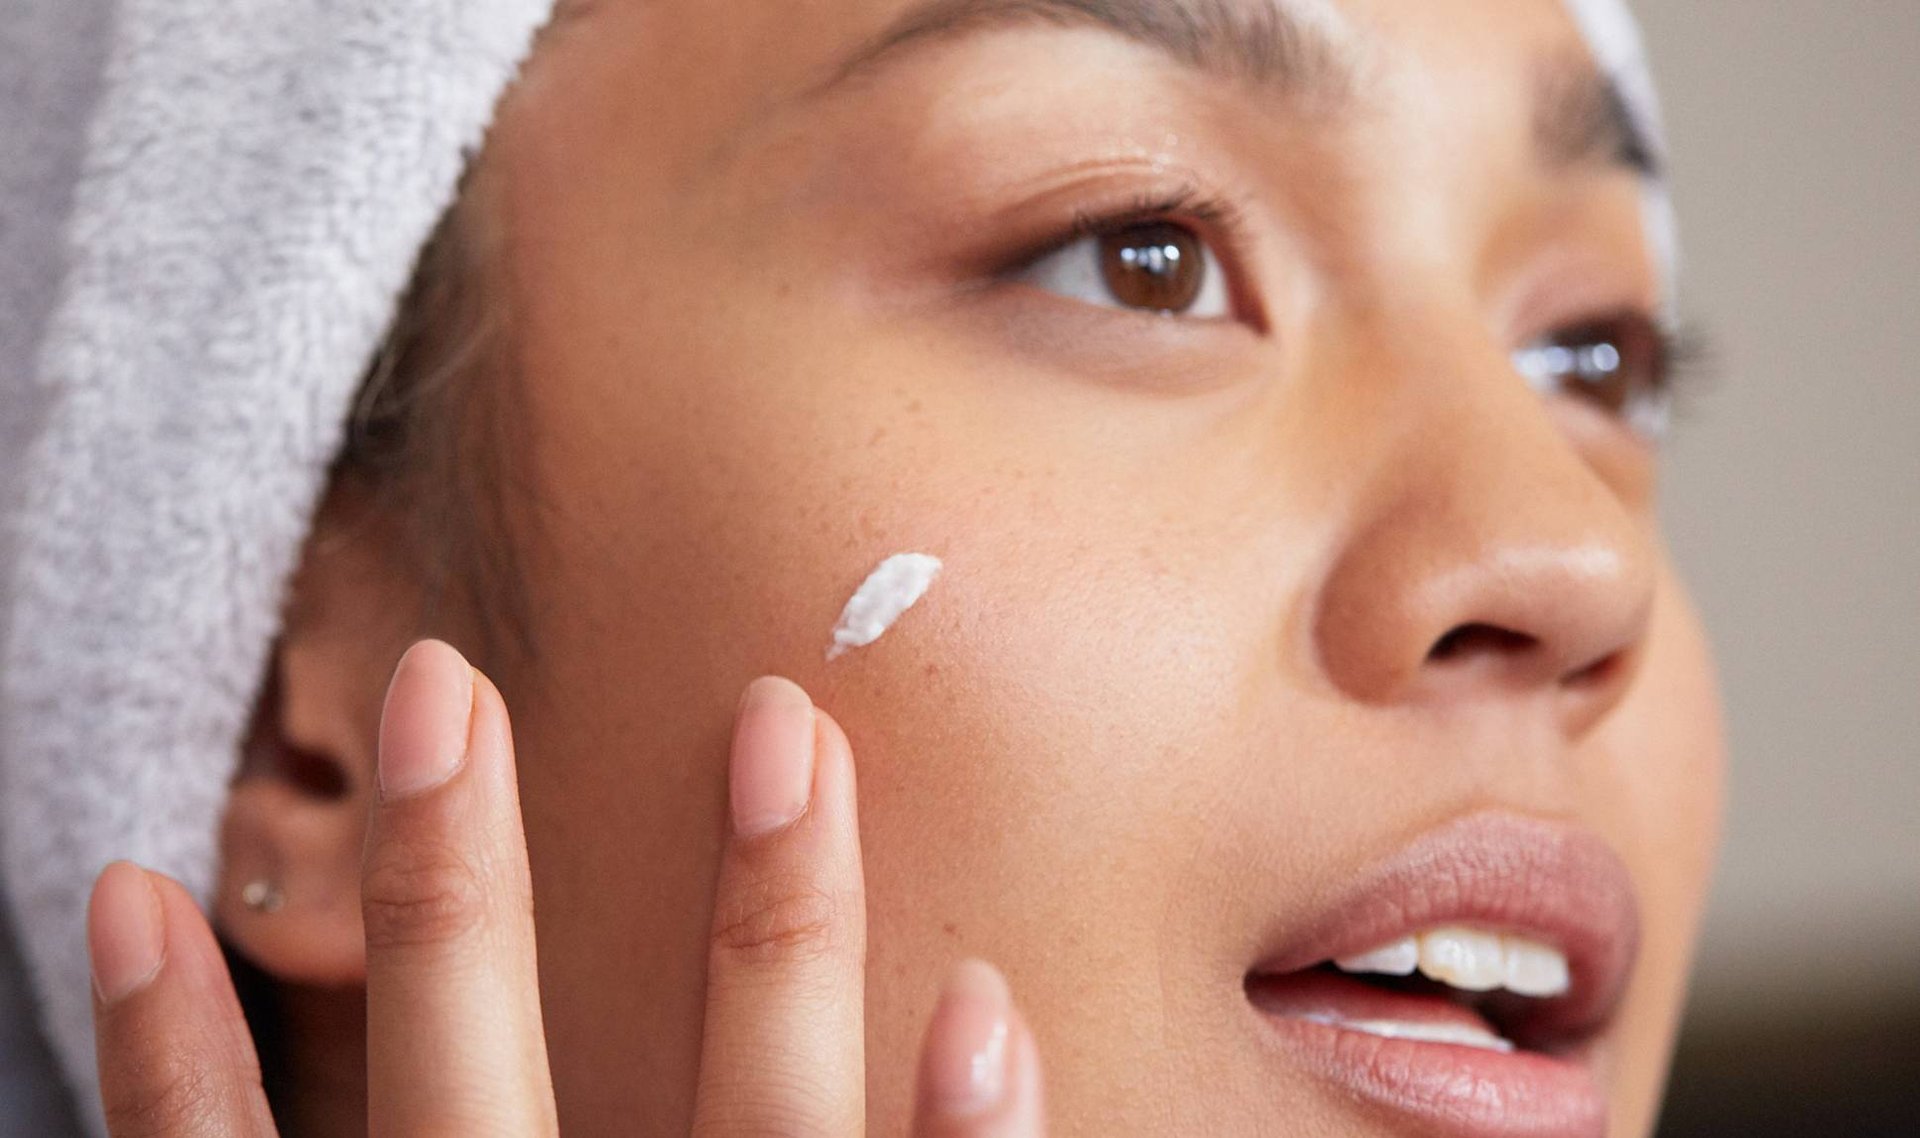 If You Have Acne Scars, Here Are 5 Products to Try